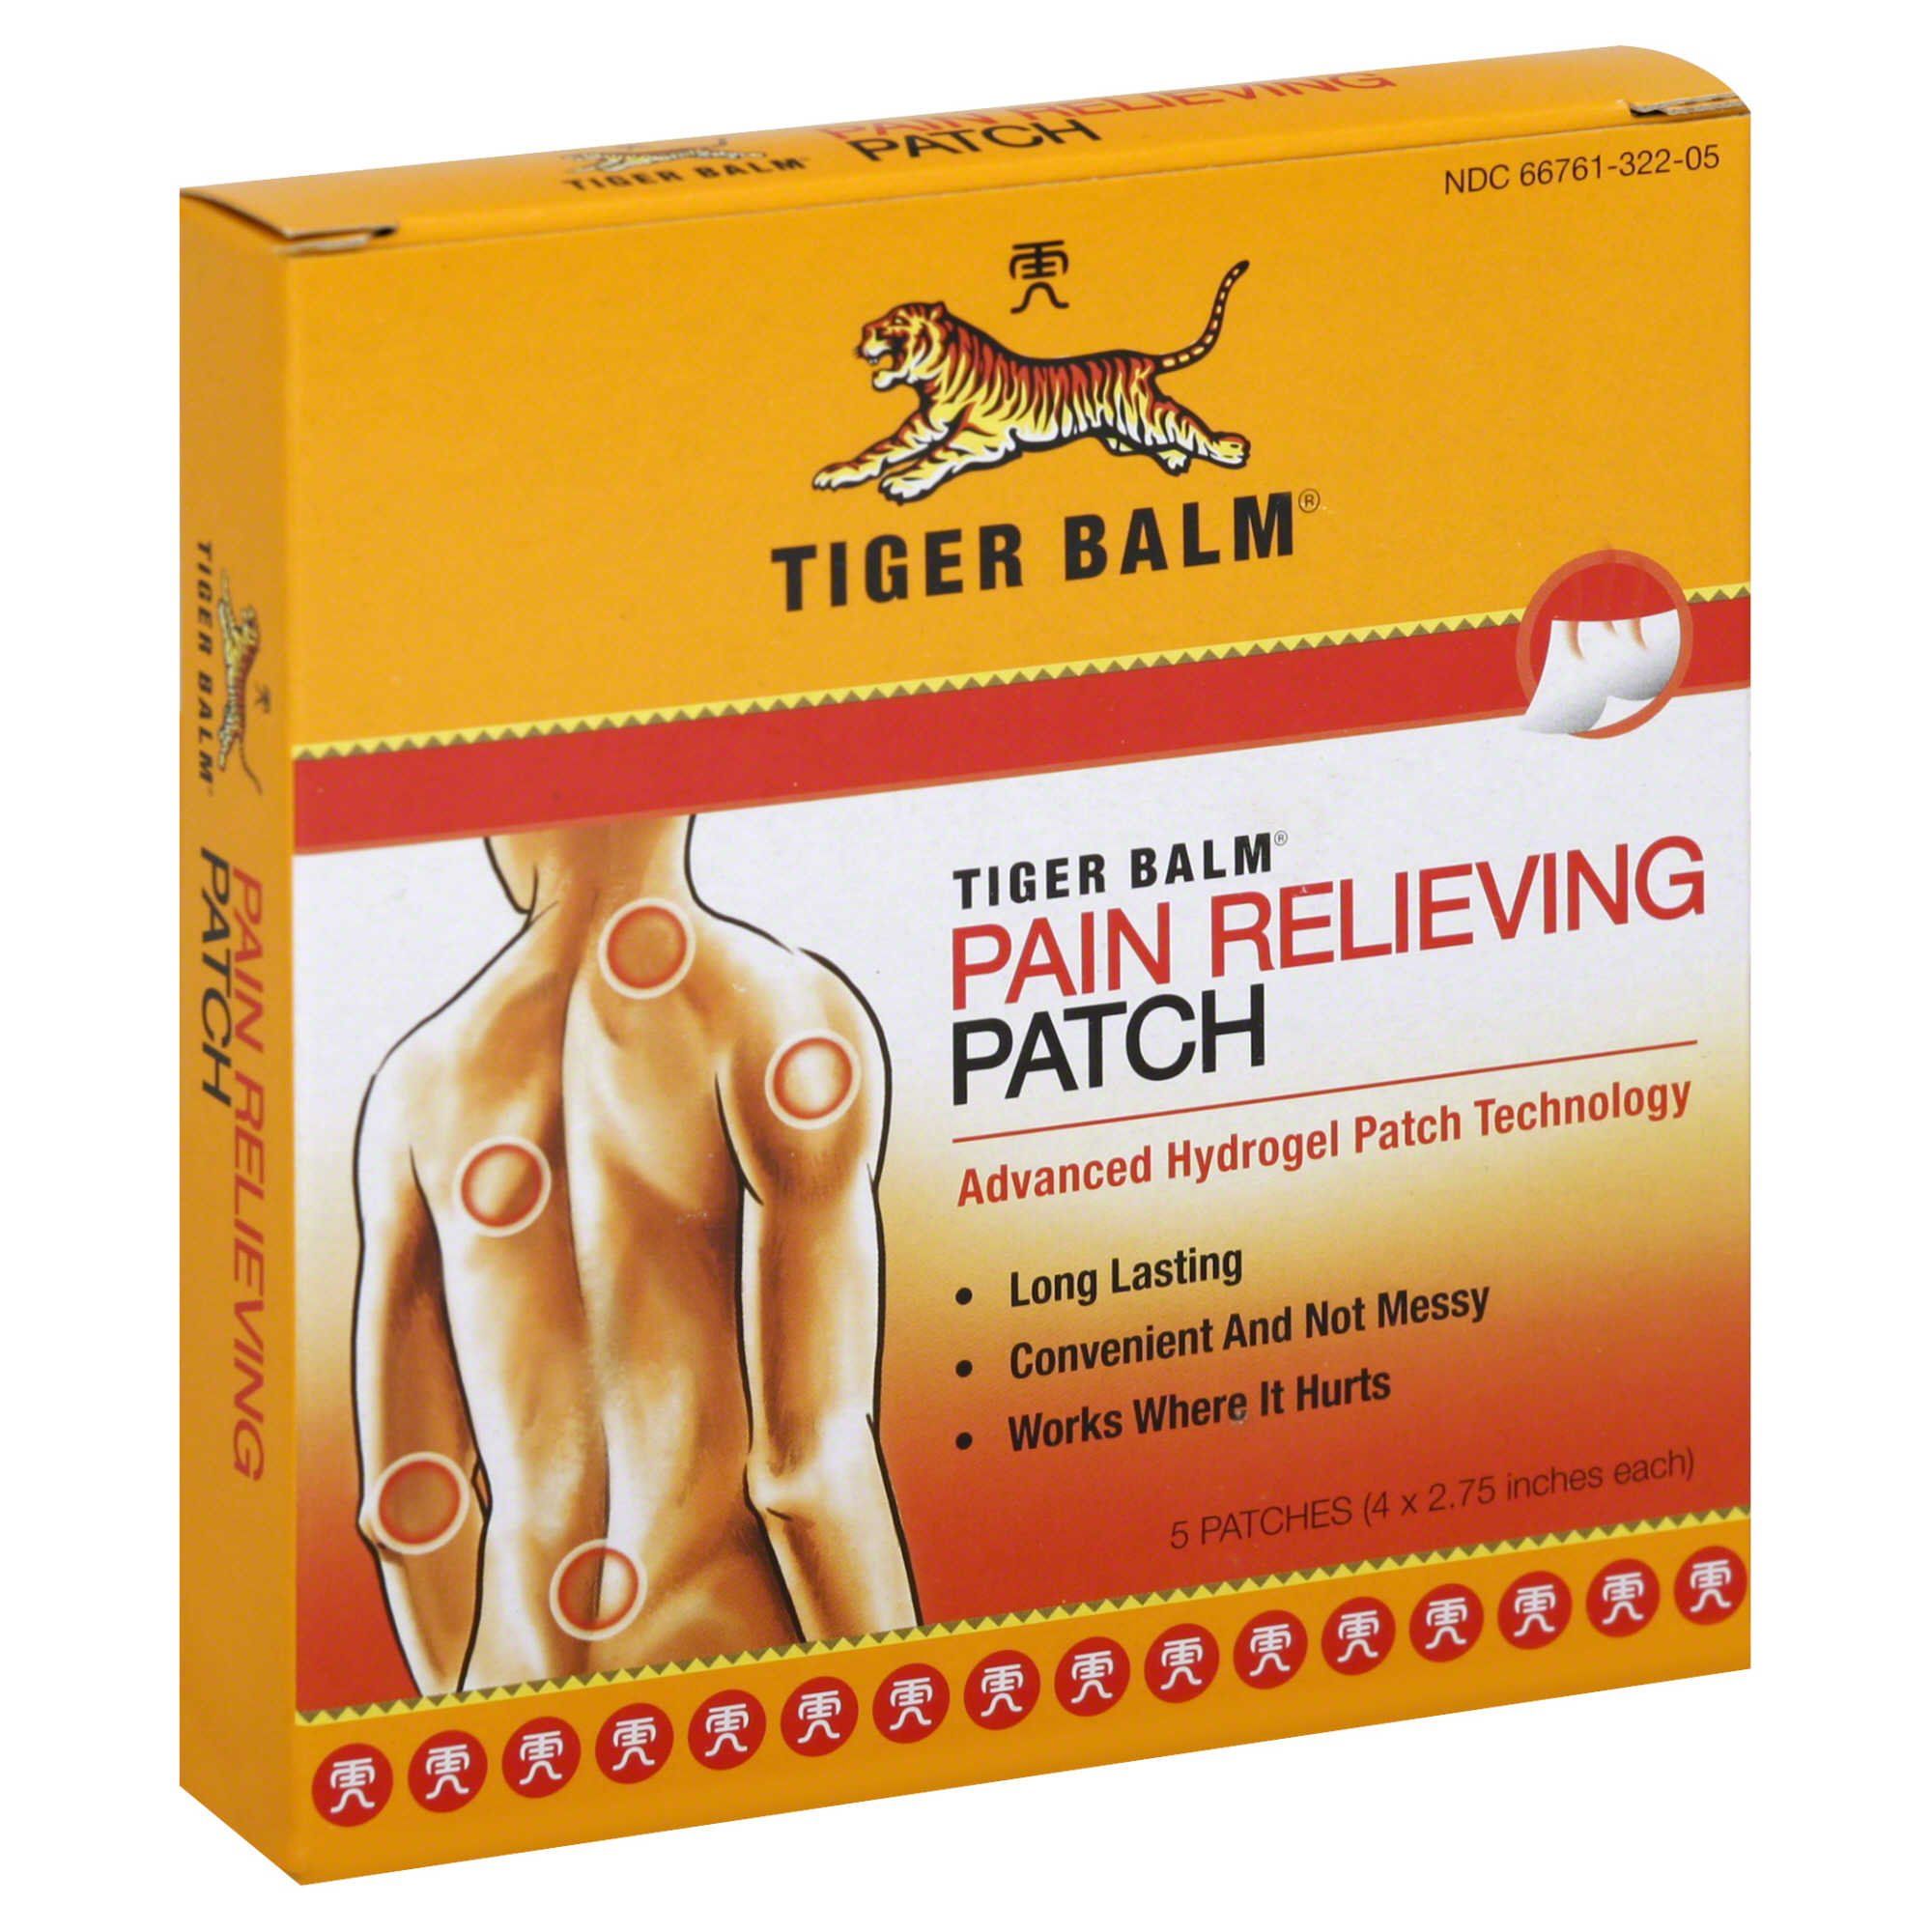 Tiger Balm Topical Pain Relieving Patch - 5 patches